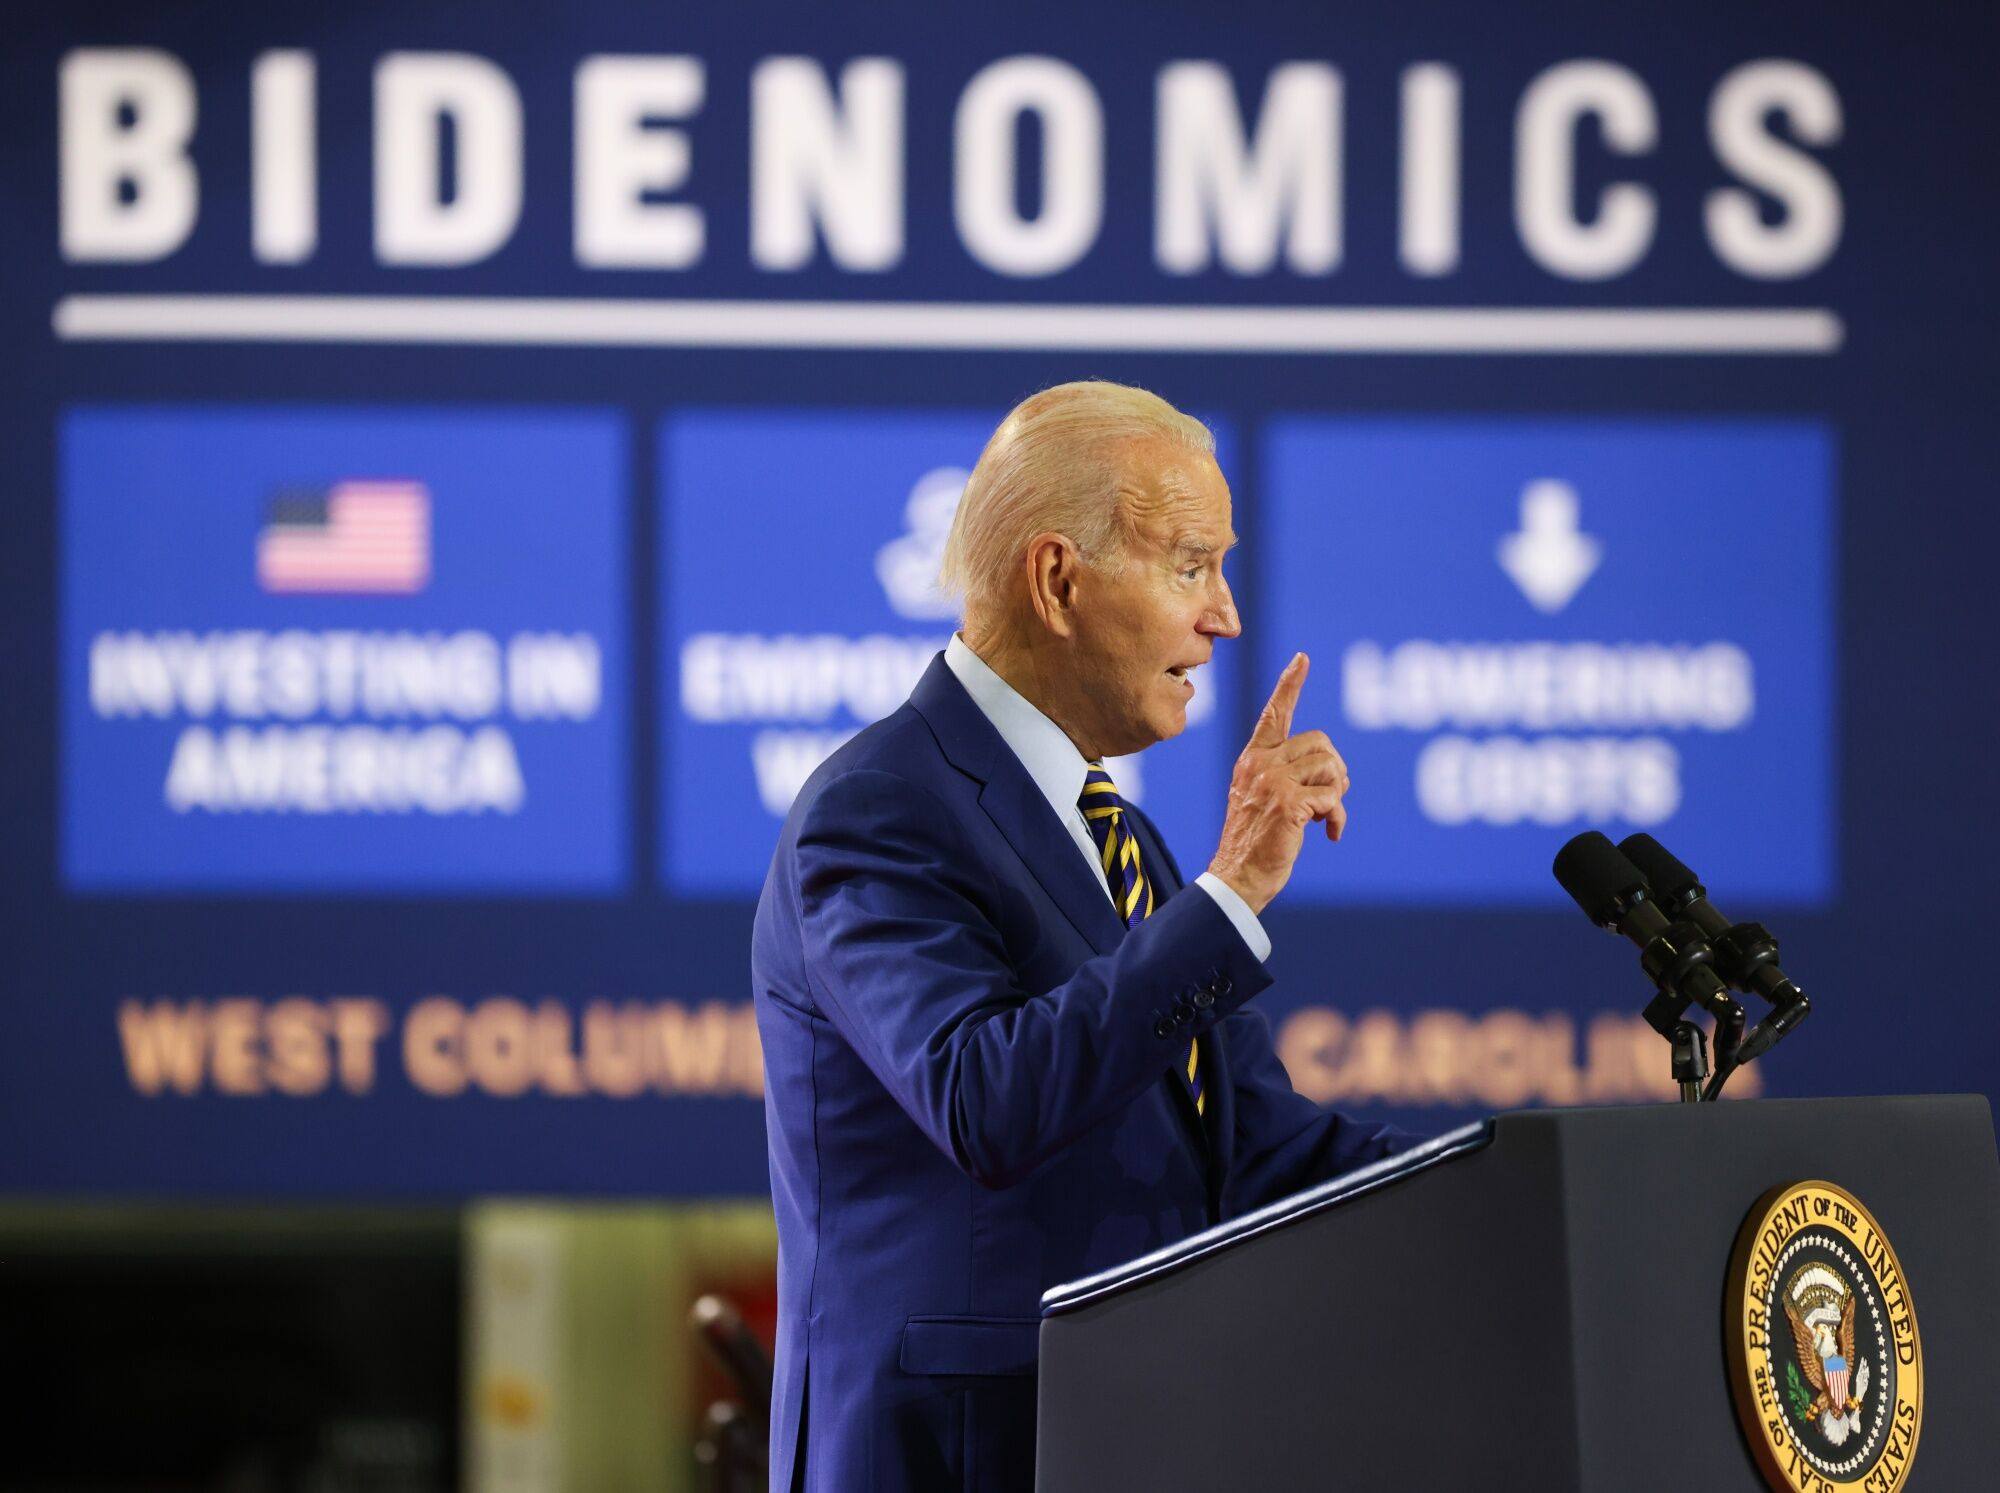 US President Joe Biden speaks at an event at the Flex facility in West Columbia, South Carolina, on July 6. Biden announced a US$60 million investment from Enphase Energy, a manufacturer of solar-energy equipment, the latest effort to underscore his administration’s economic agenda as he seeks re-election. Photo: Bloomberg